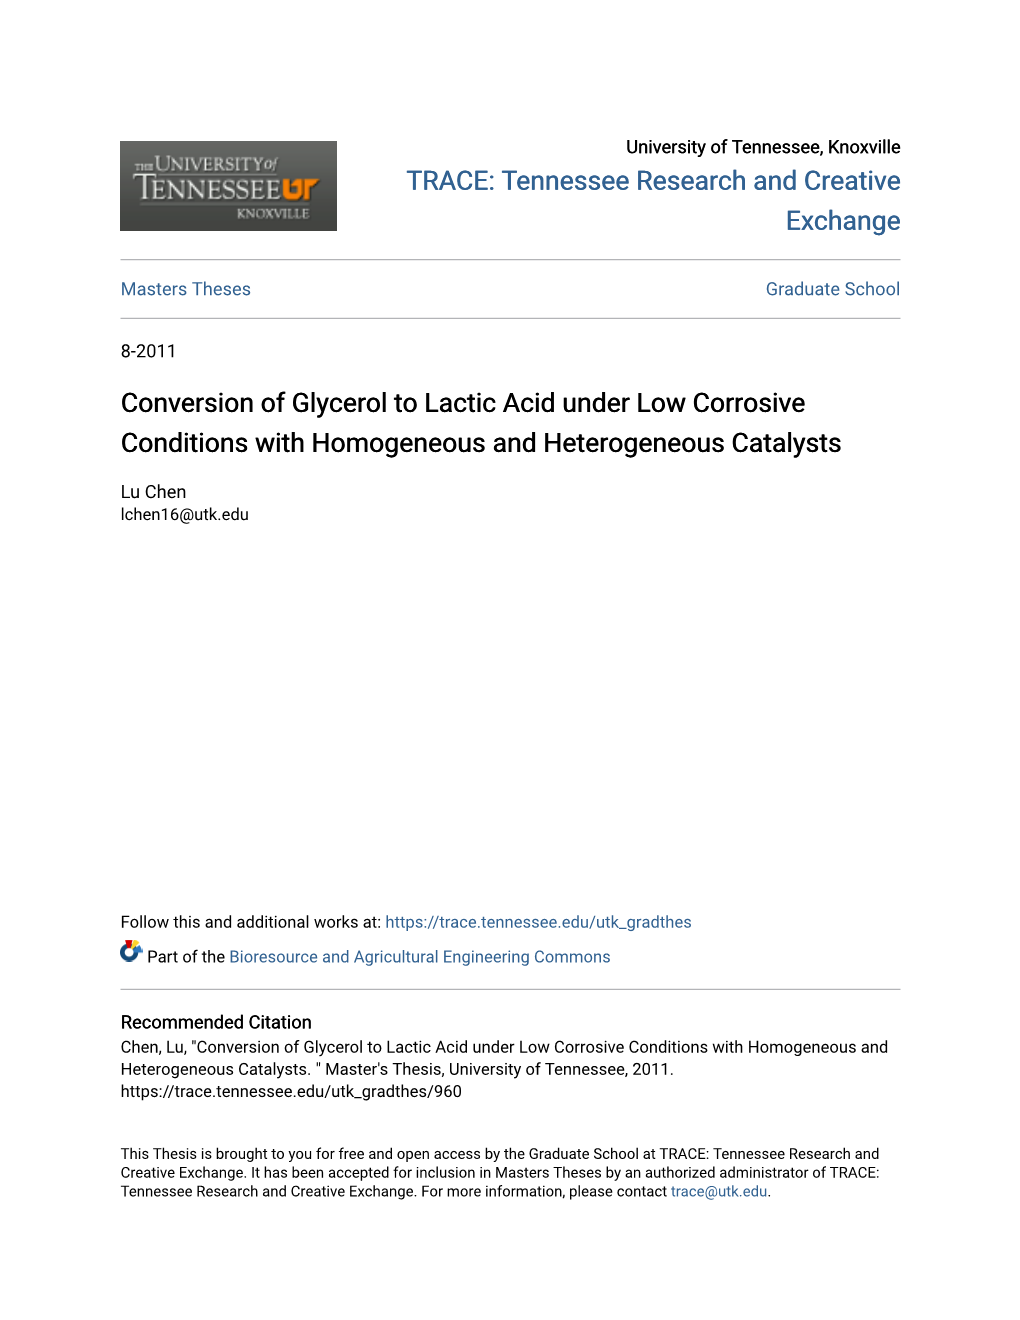 Conversion of Glycerol to Lactic Acid Under Low Corrosive Conditions with Homogeneous and Heterogeneous Catalysts